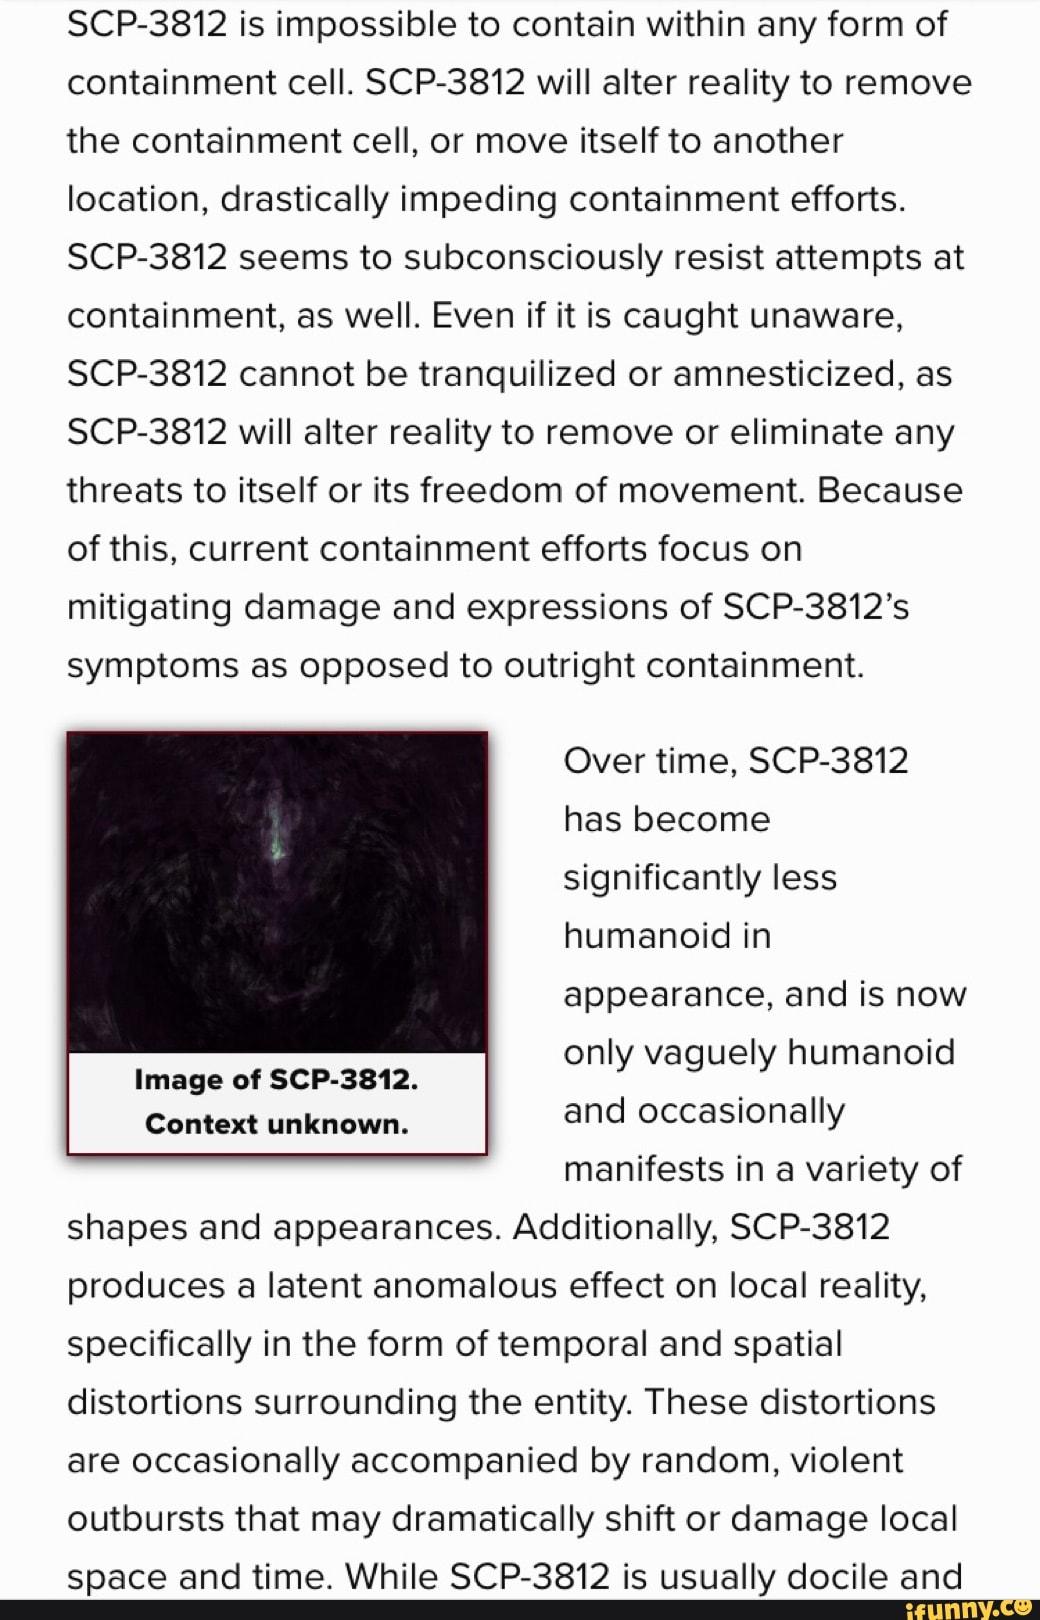 SCP-3812 is impossible to contain within any form of containment cell. SCP- 3812 will alter reality to remove the containment cell, or move itself to  another location, drastically impeding containment efforts. SCP-3812 seems